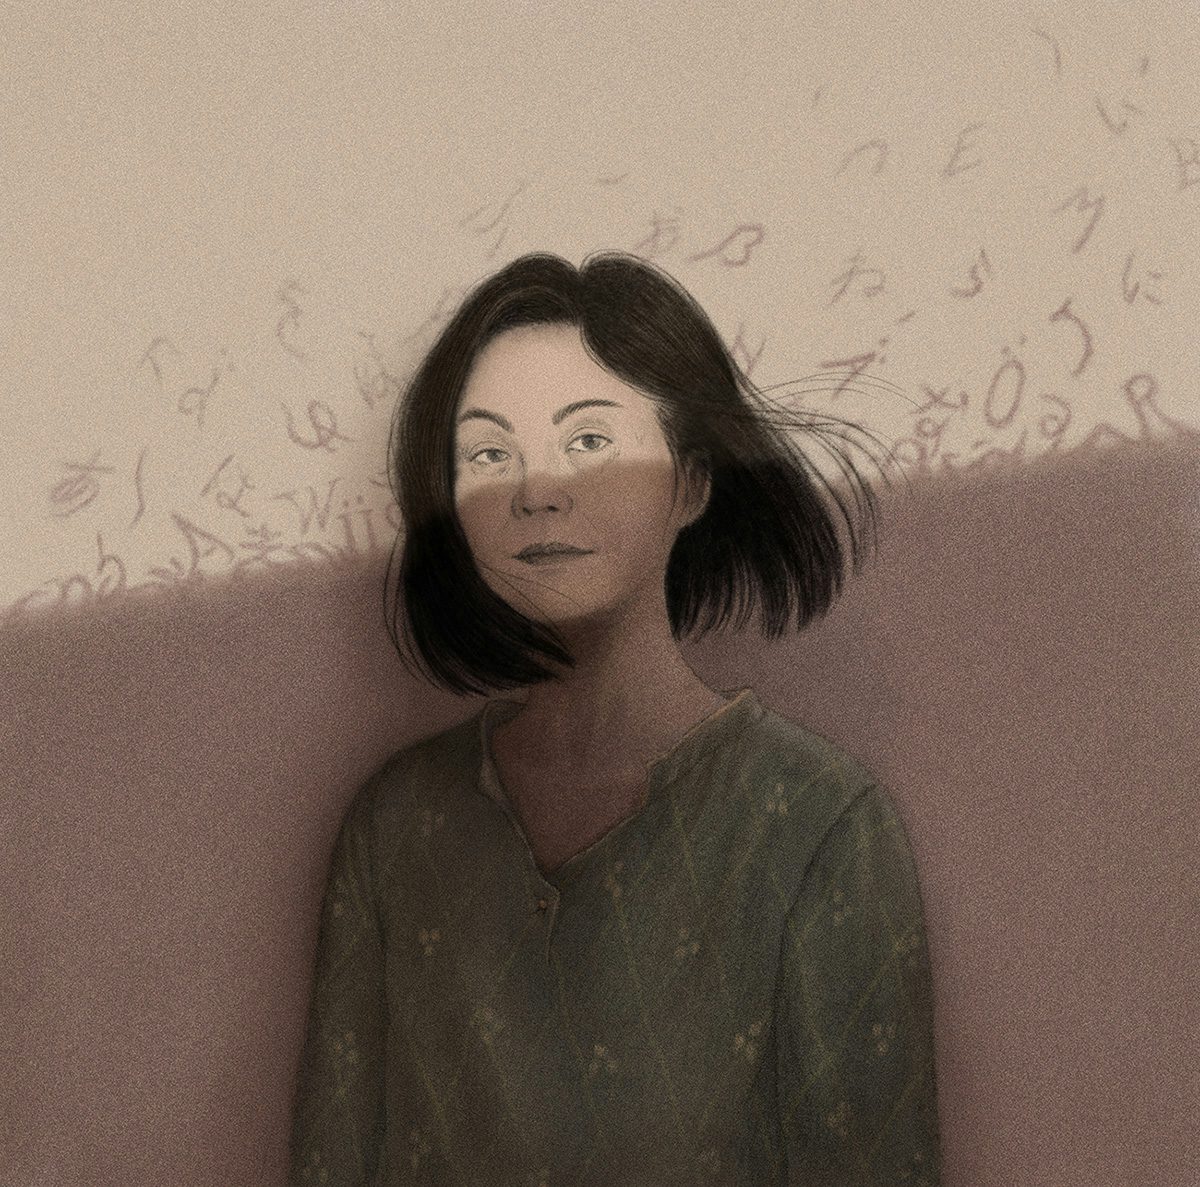 Illustrated portrait of the writer Yoko Tawada for the New Yorker